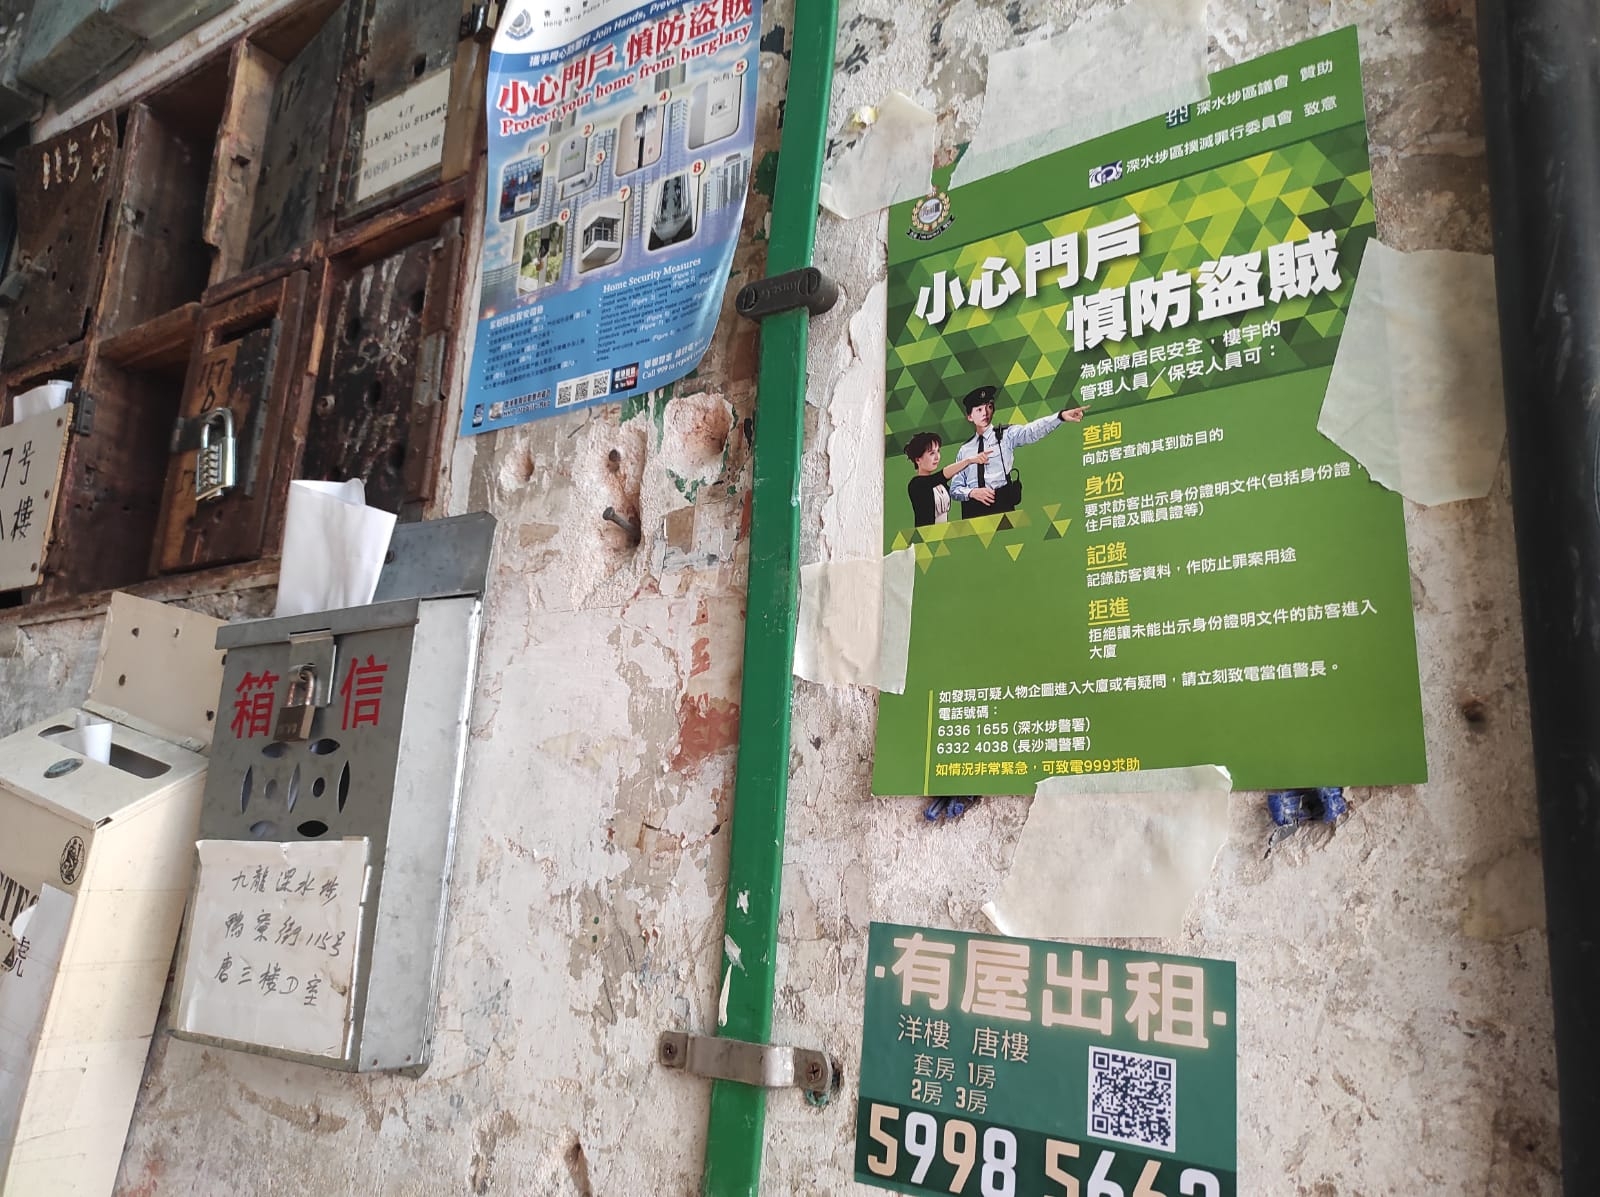 Promotion of Quality Building Management (providing cleansing services for the common areas of the buildings, distributing leaflets and souvenirs to the residents) 